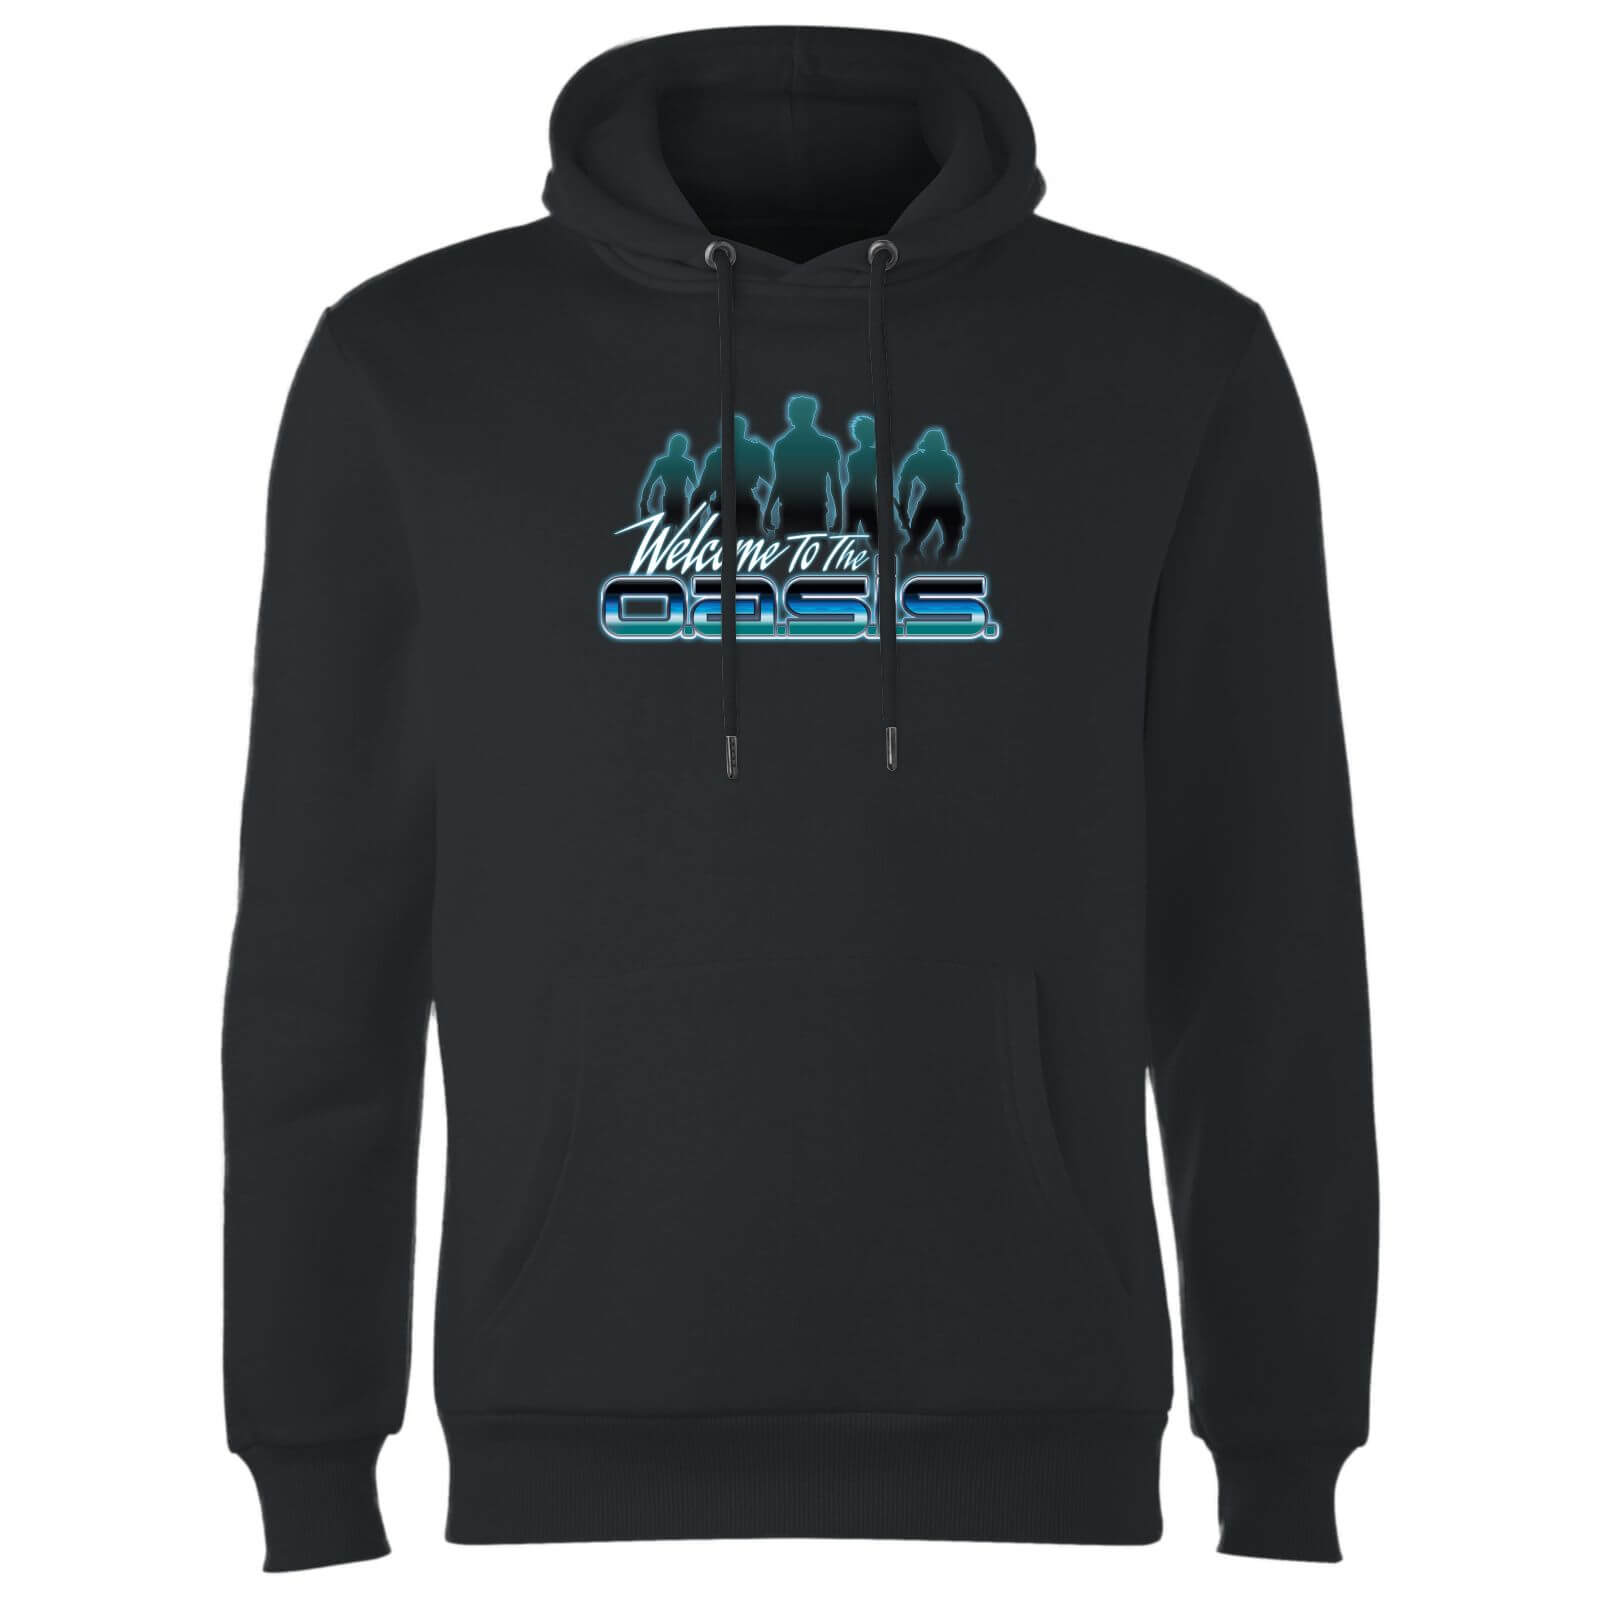 Ready Player One Welcome To The Oasis Hoodie - Black - L - Black